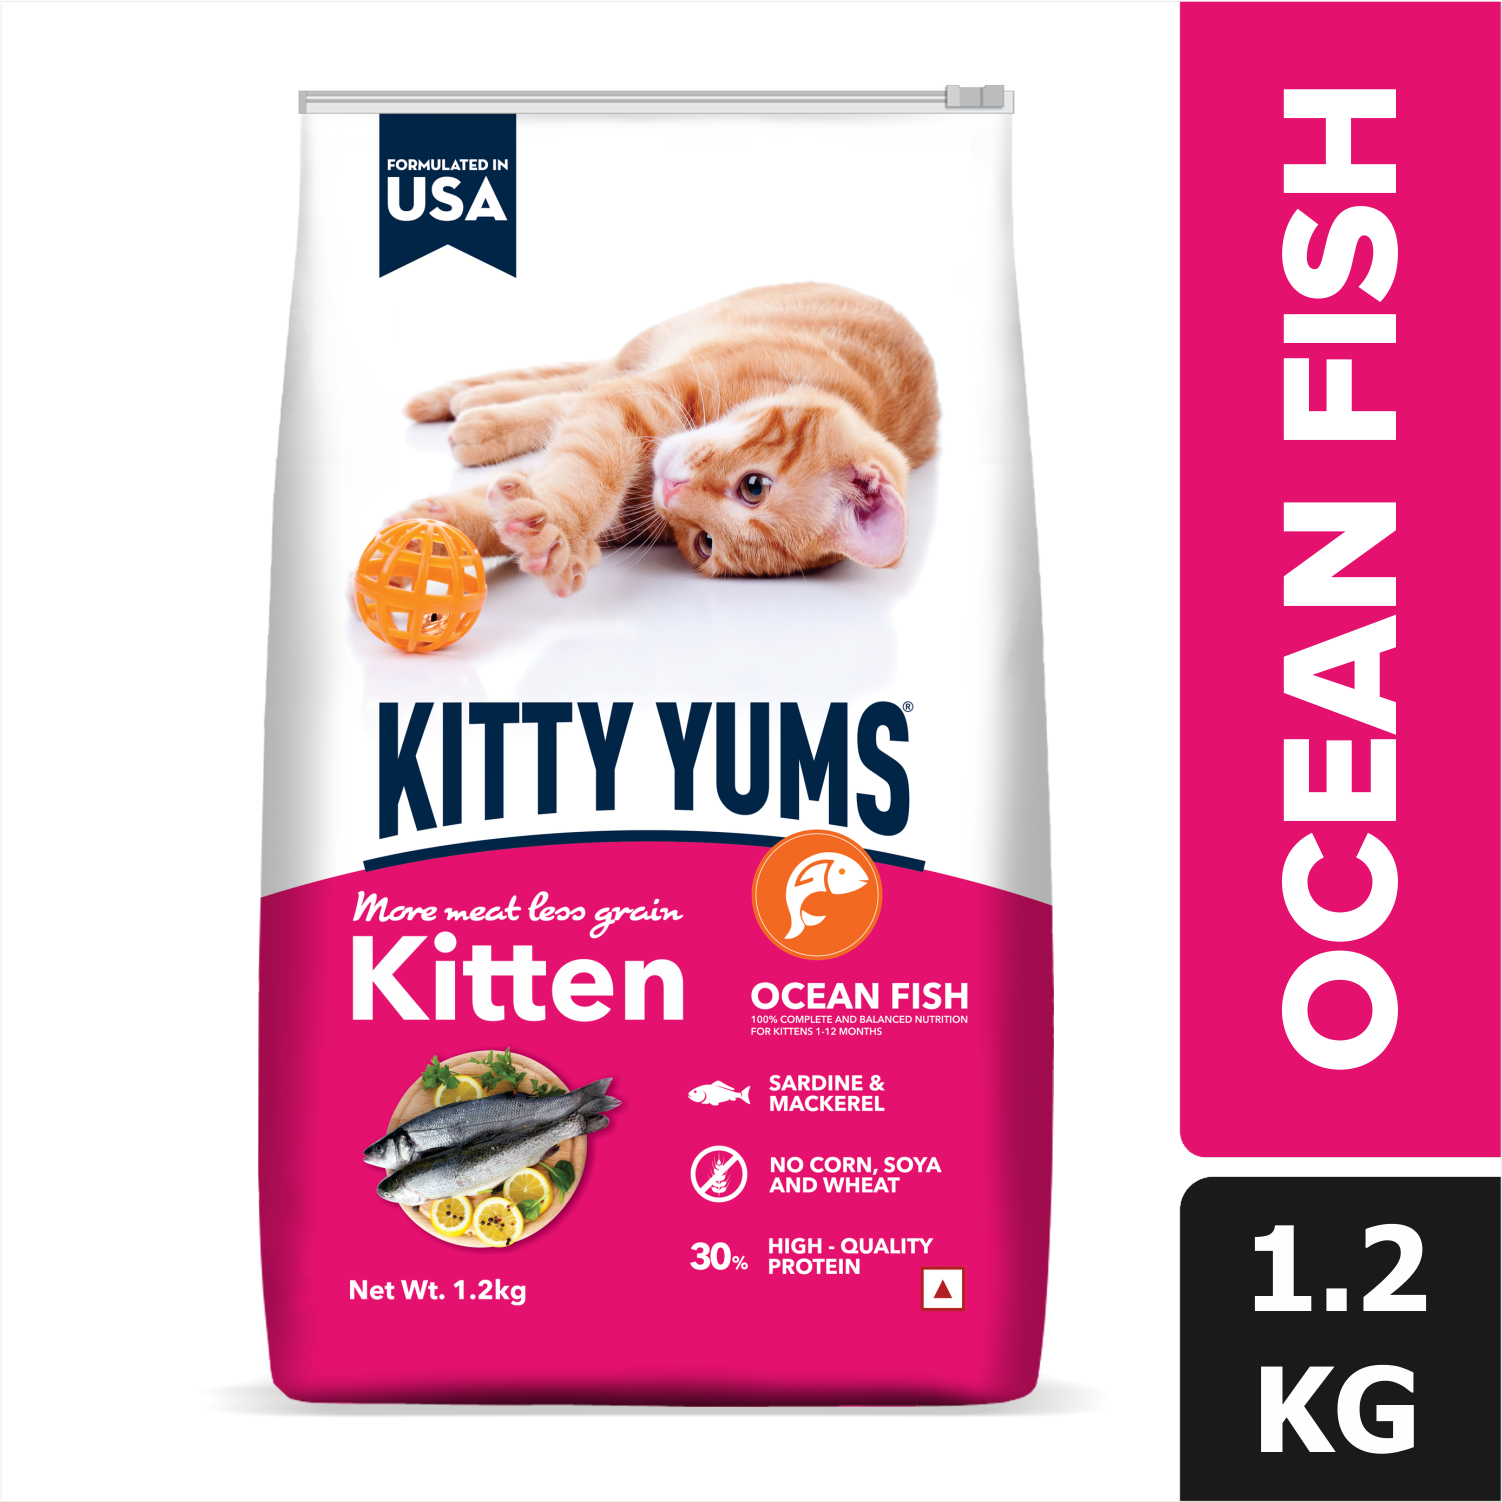 Kitty Yums Ocean Fish Kitten (1 to 12 Months) Cat Dry Food